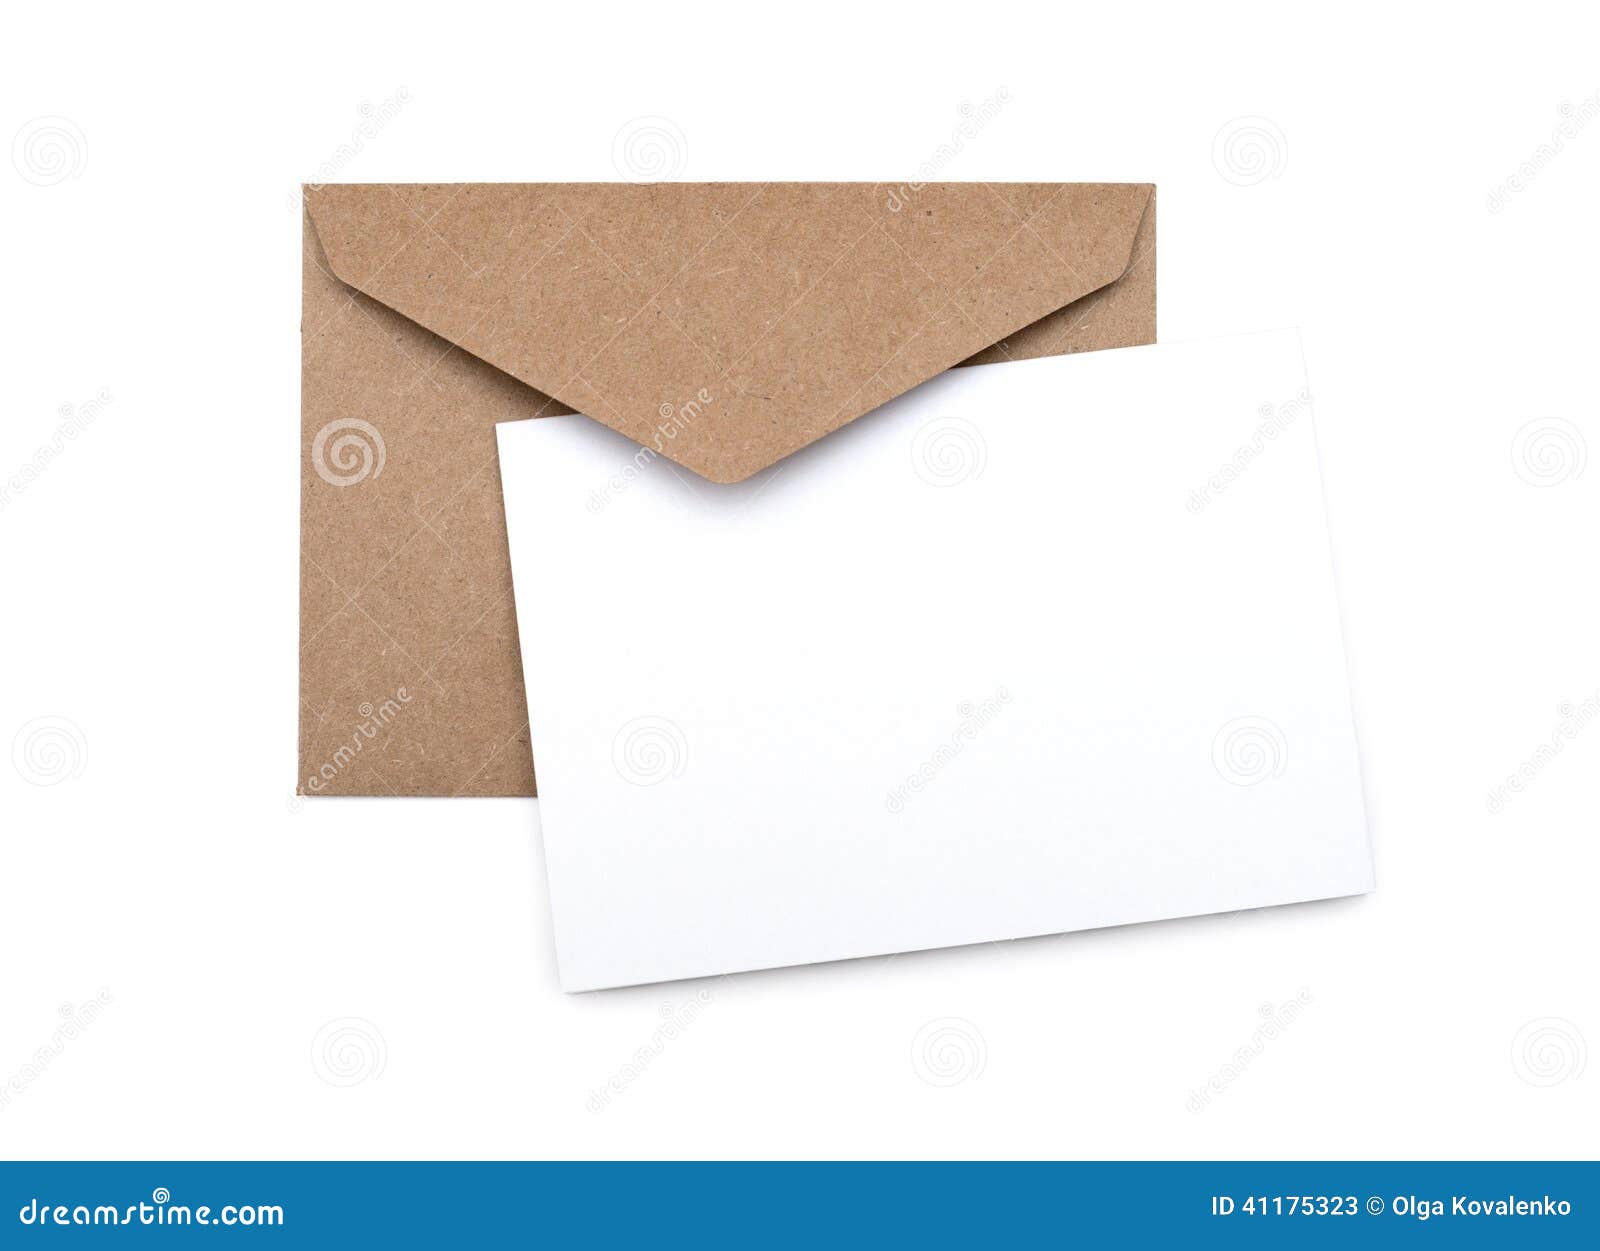 brown envelope with a blank white card